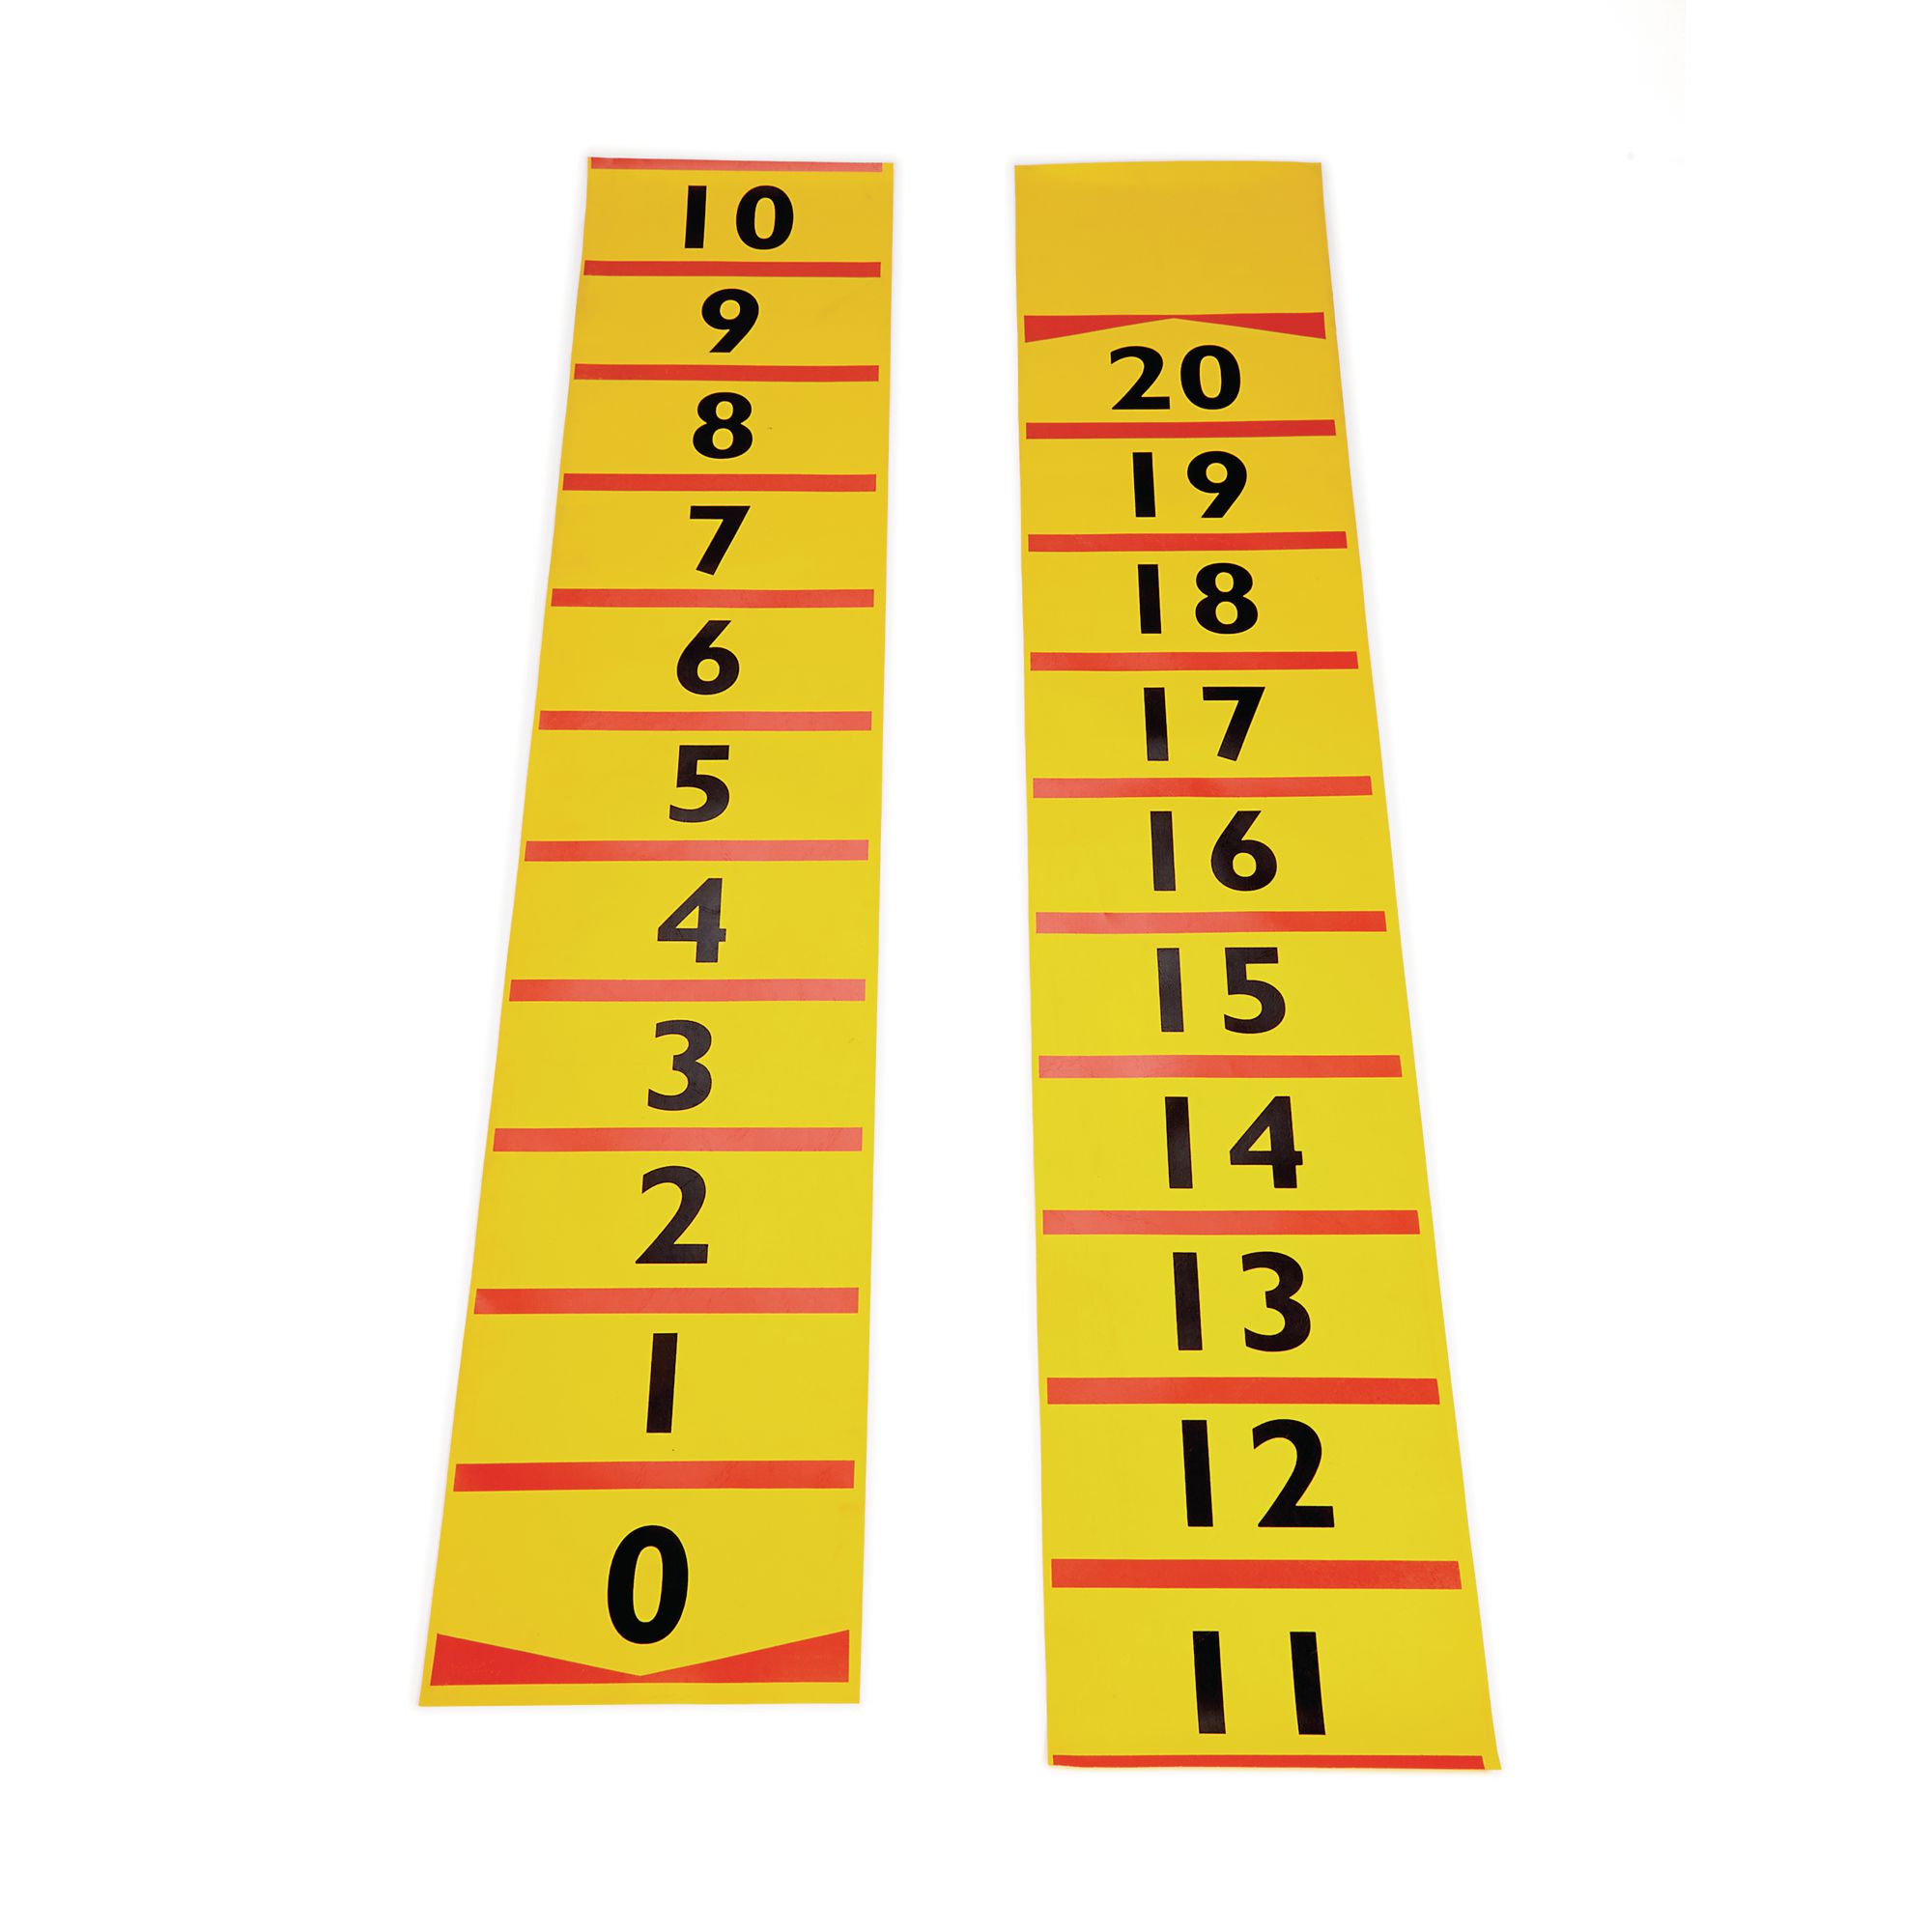 How To Plot Numbers On Number Line